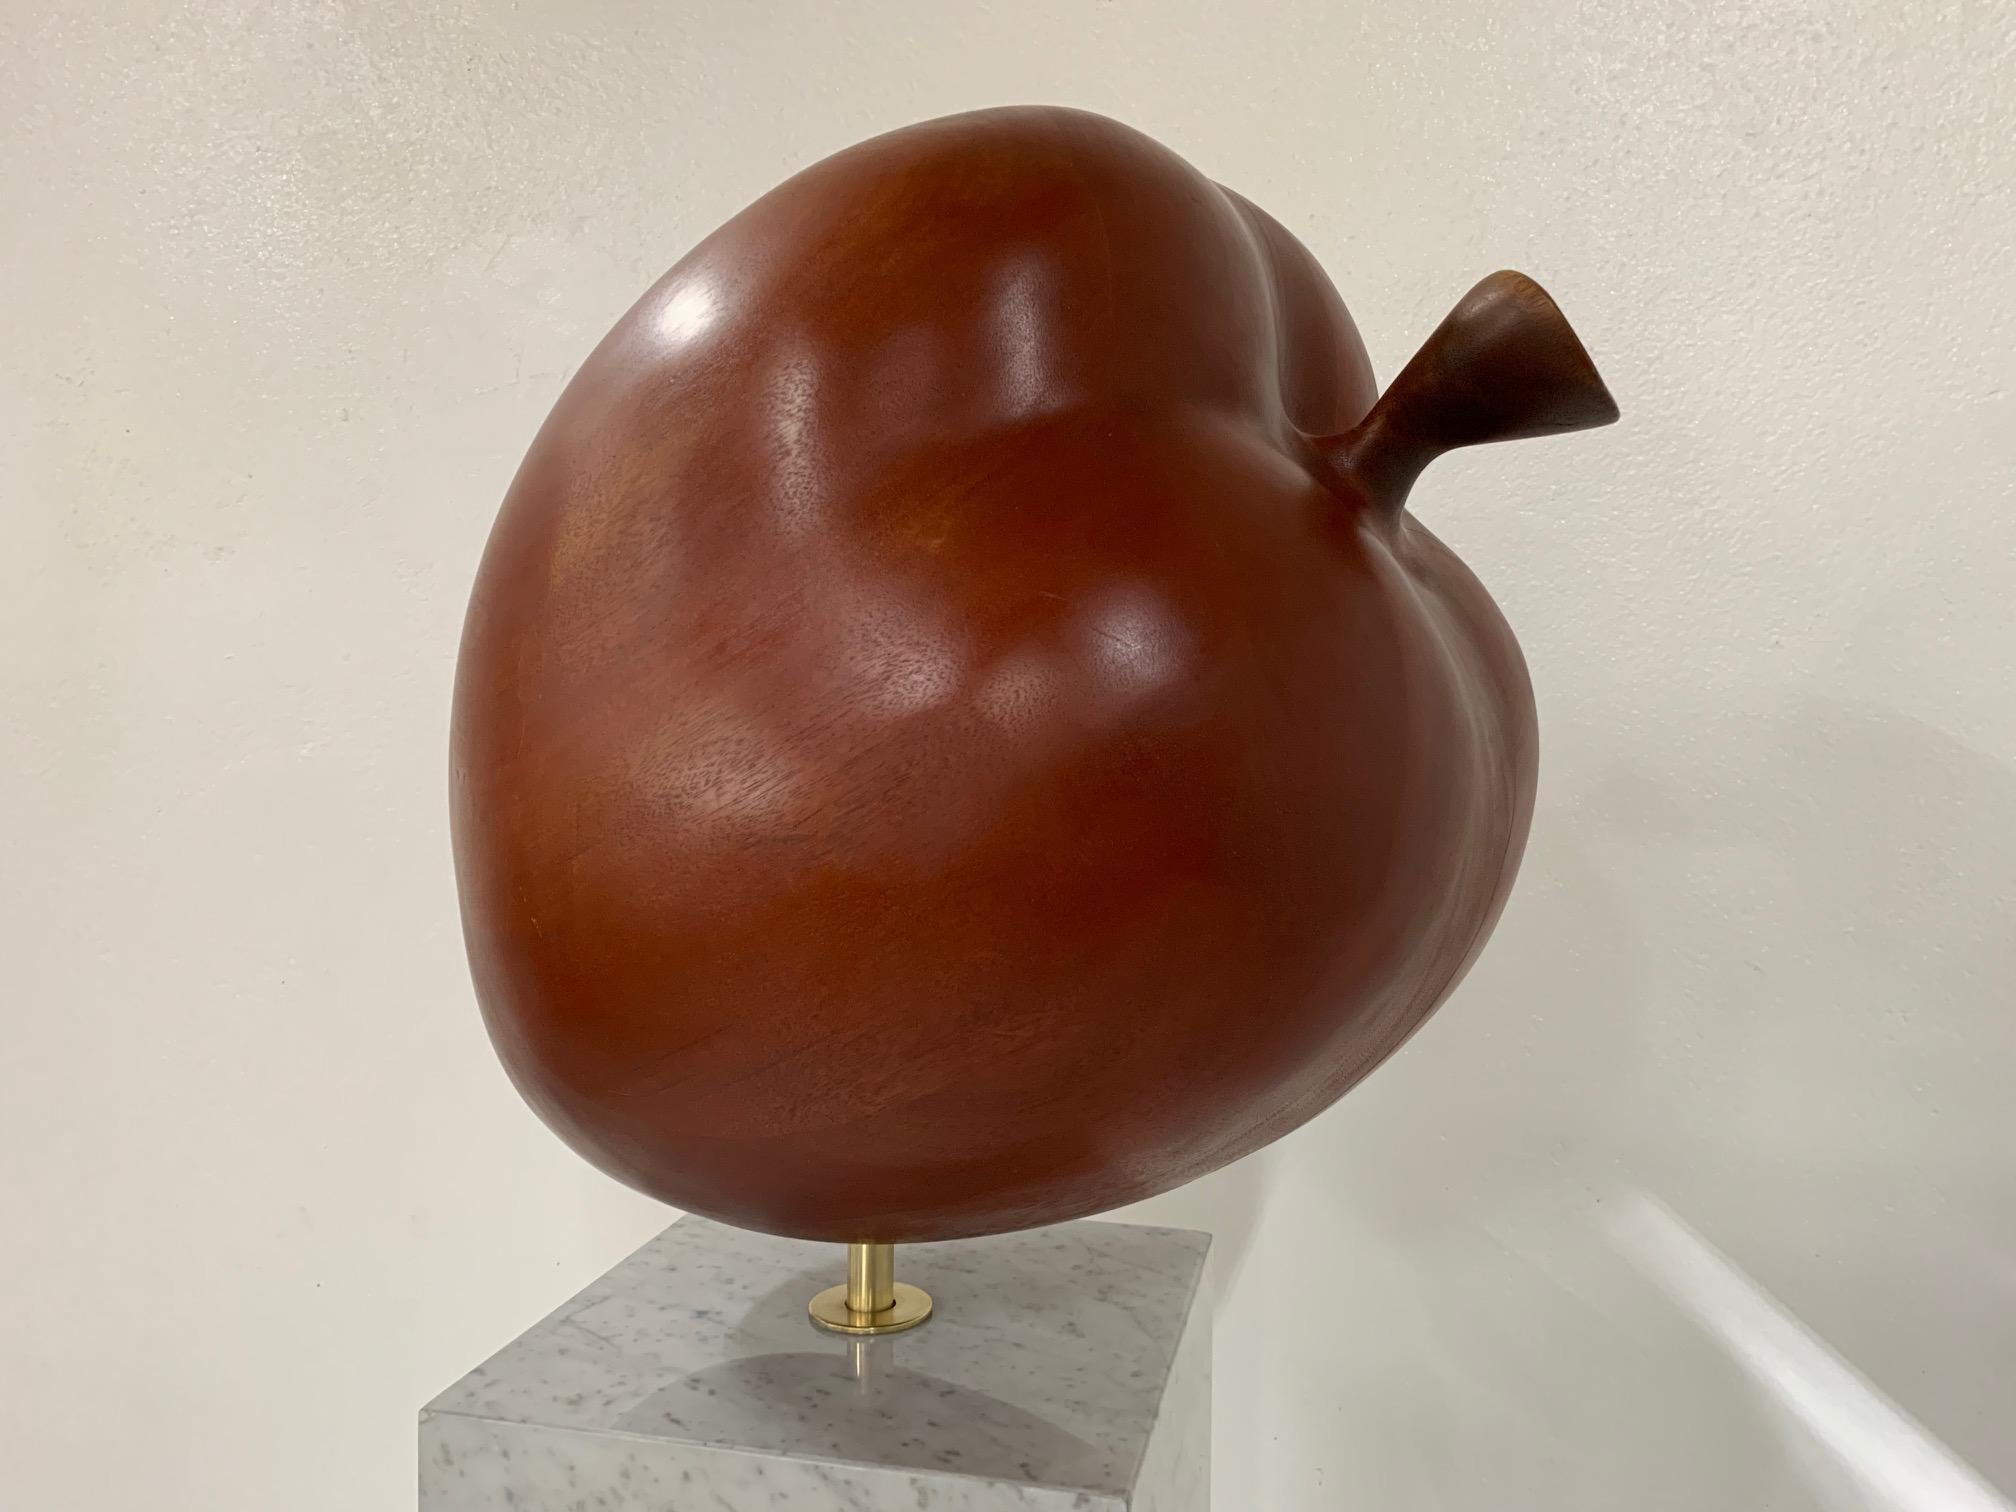 Decorative, large-scale teak apple sculpture on a Carrara marble pedestal. Has a solid brass connector which holds the apple to the marble. The apple is made of solid teak planks.
Sculpture measures (in its entirety) 54.5 H x 21 W. Marble base